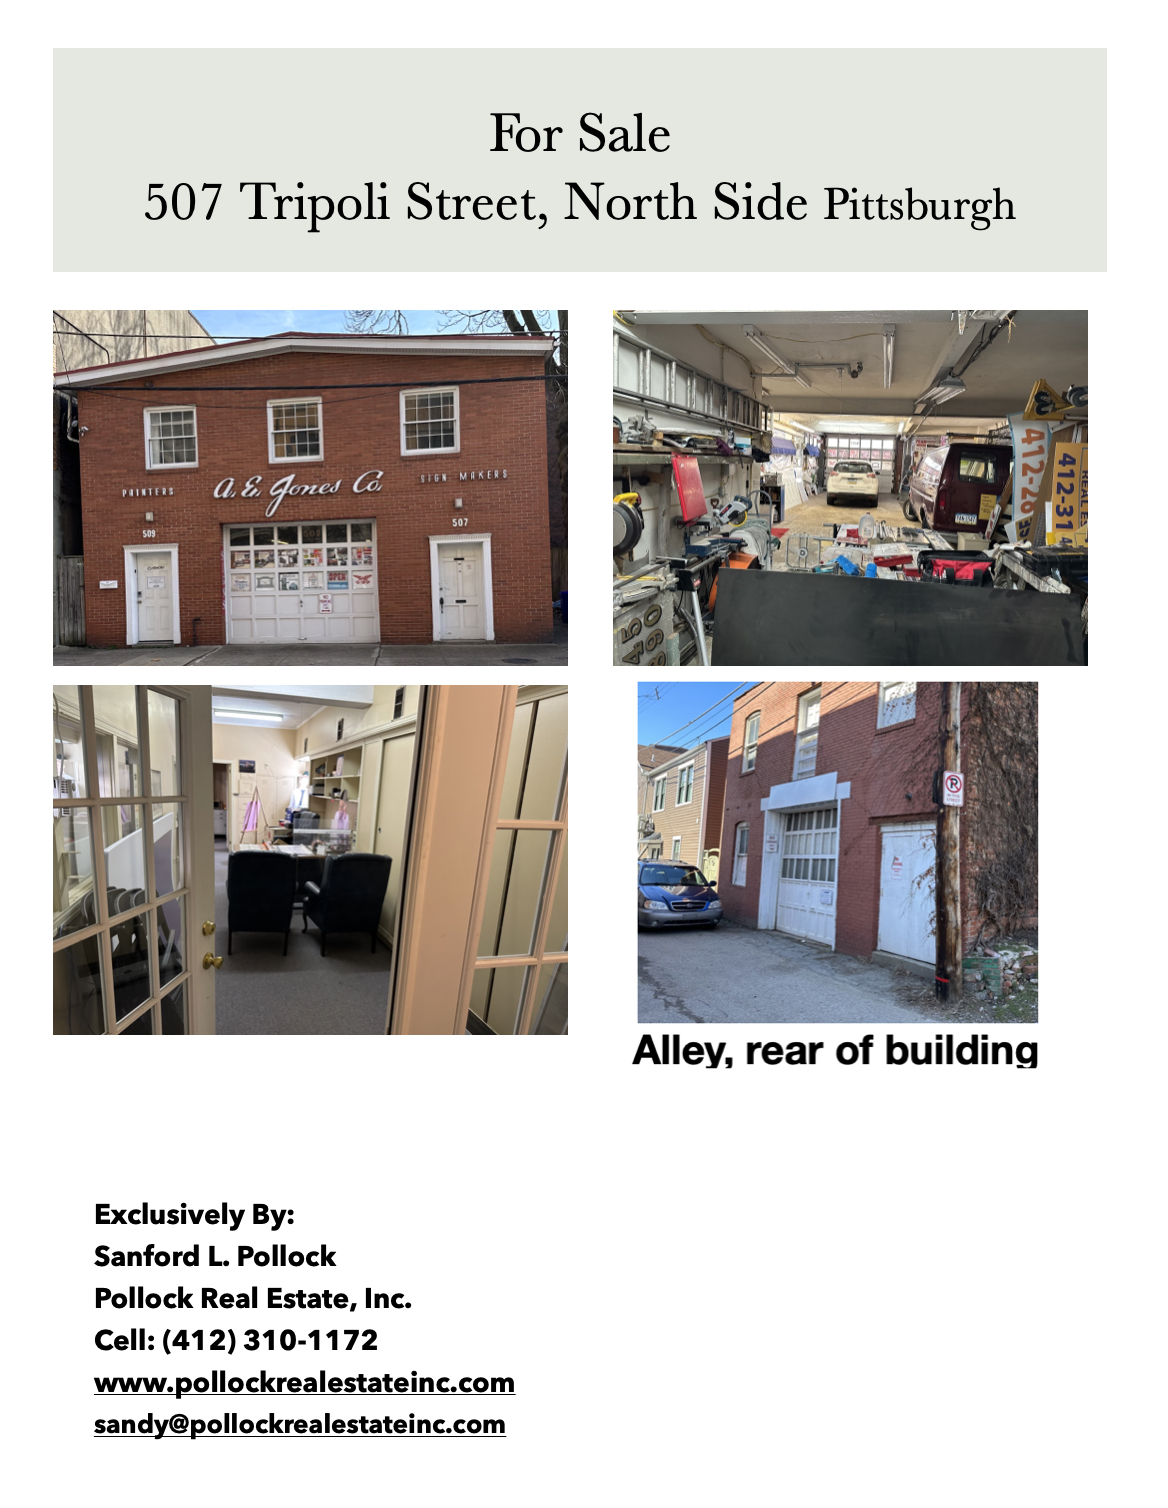 Sale 507 Tripoli Street North Side - Just Listed for Sale 507 Tripoli Street, North Side. 2 Story 6400SF Currently warehou...